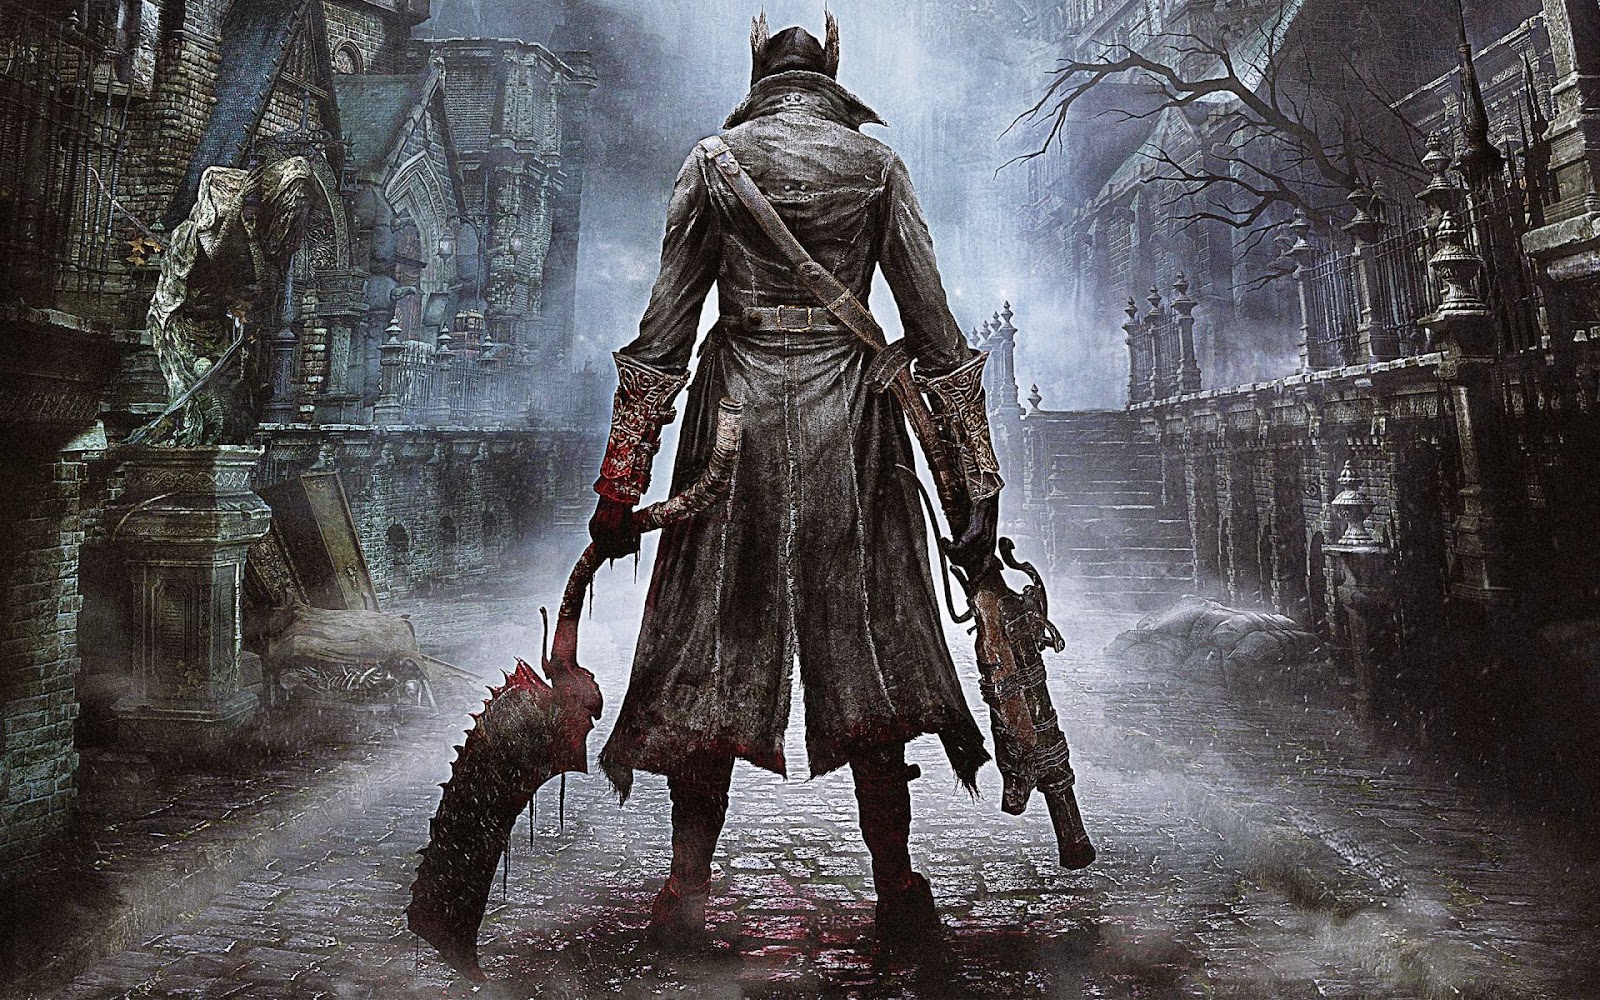 Lies of P isn't as brilliant as Bloodborne, and that's OK – in